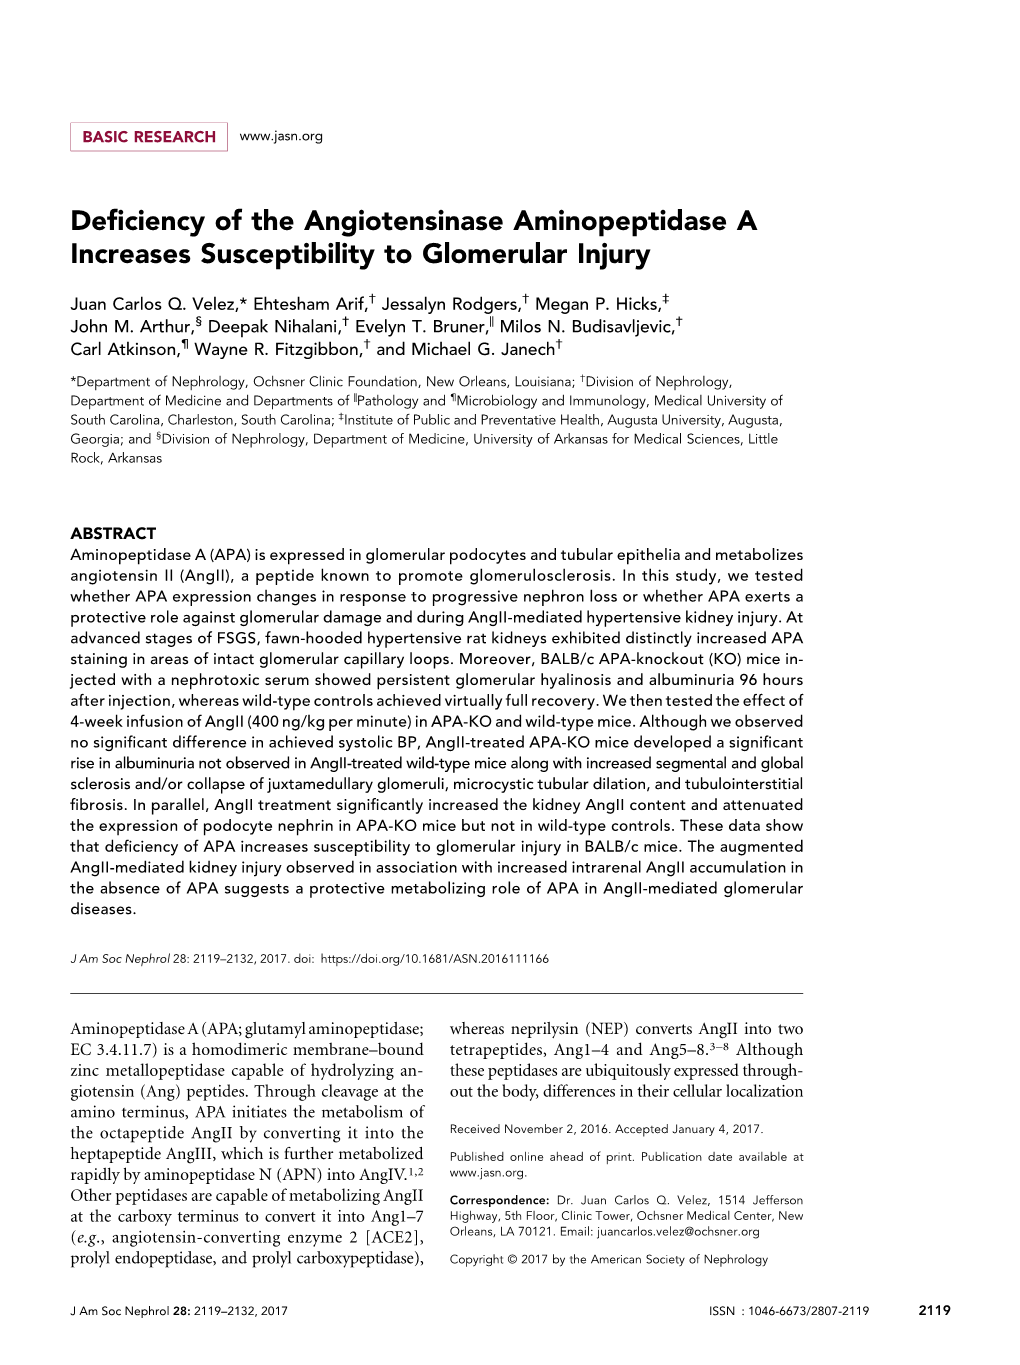 Deficiency of the Angiotensinase Aminopeptidase a Increases